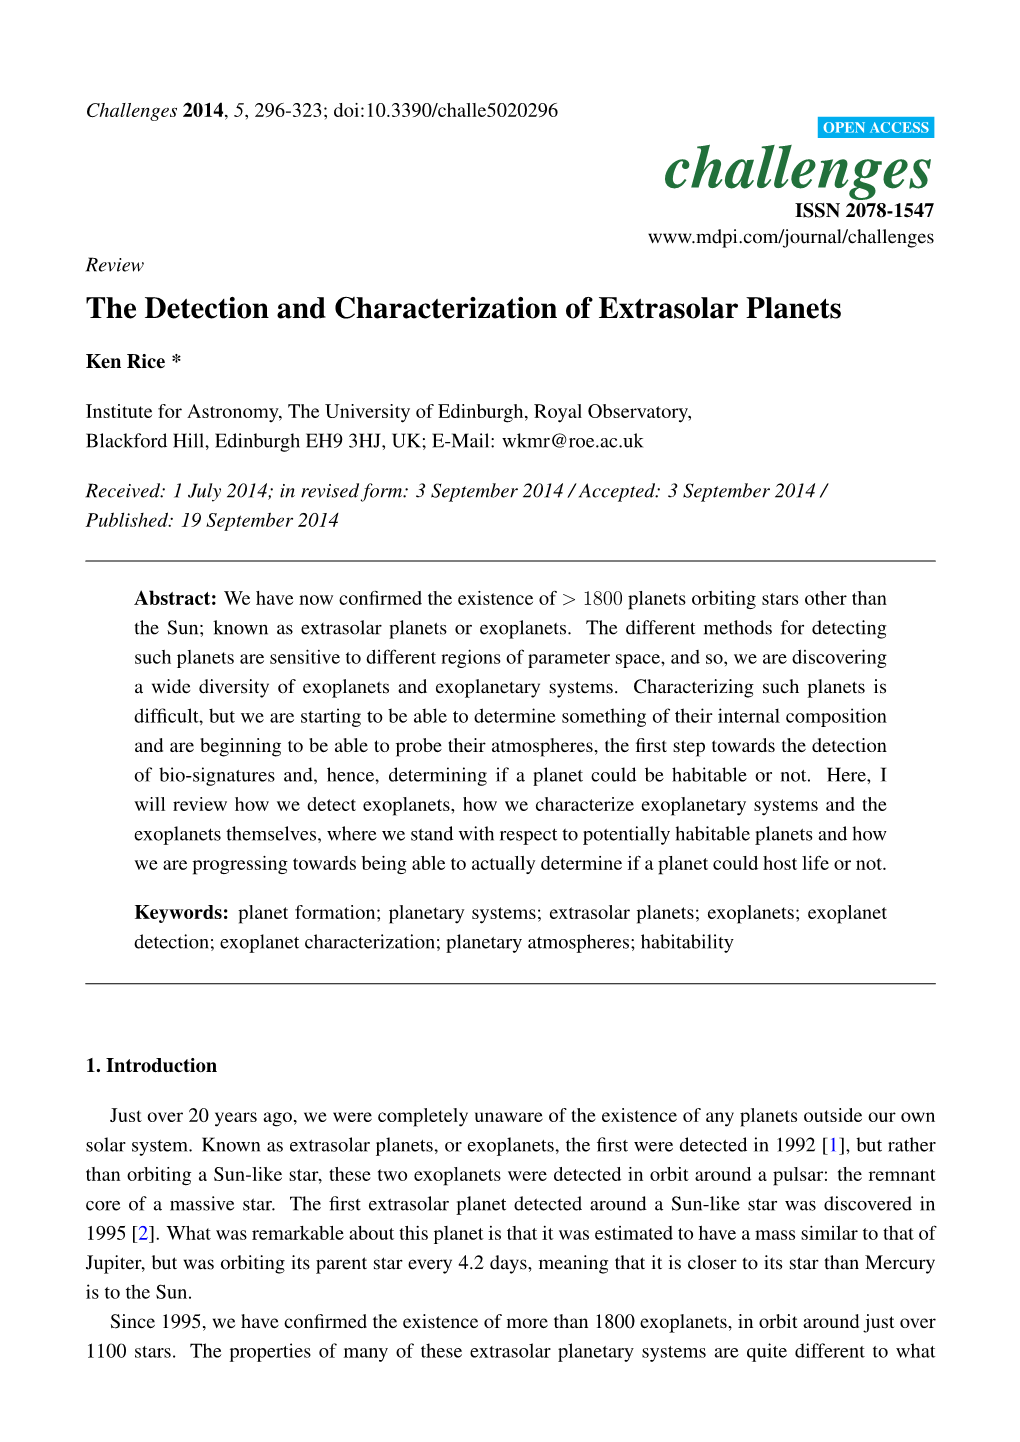 The Detection and Characterization of Extrasolar Planets